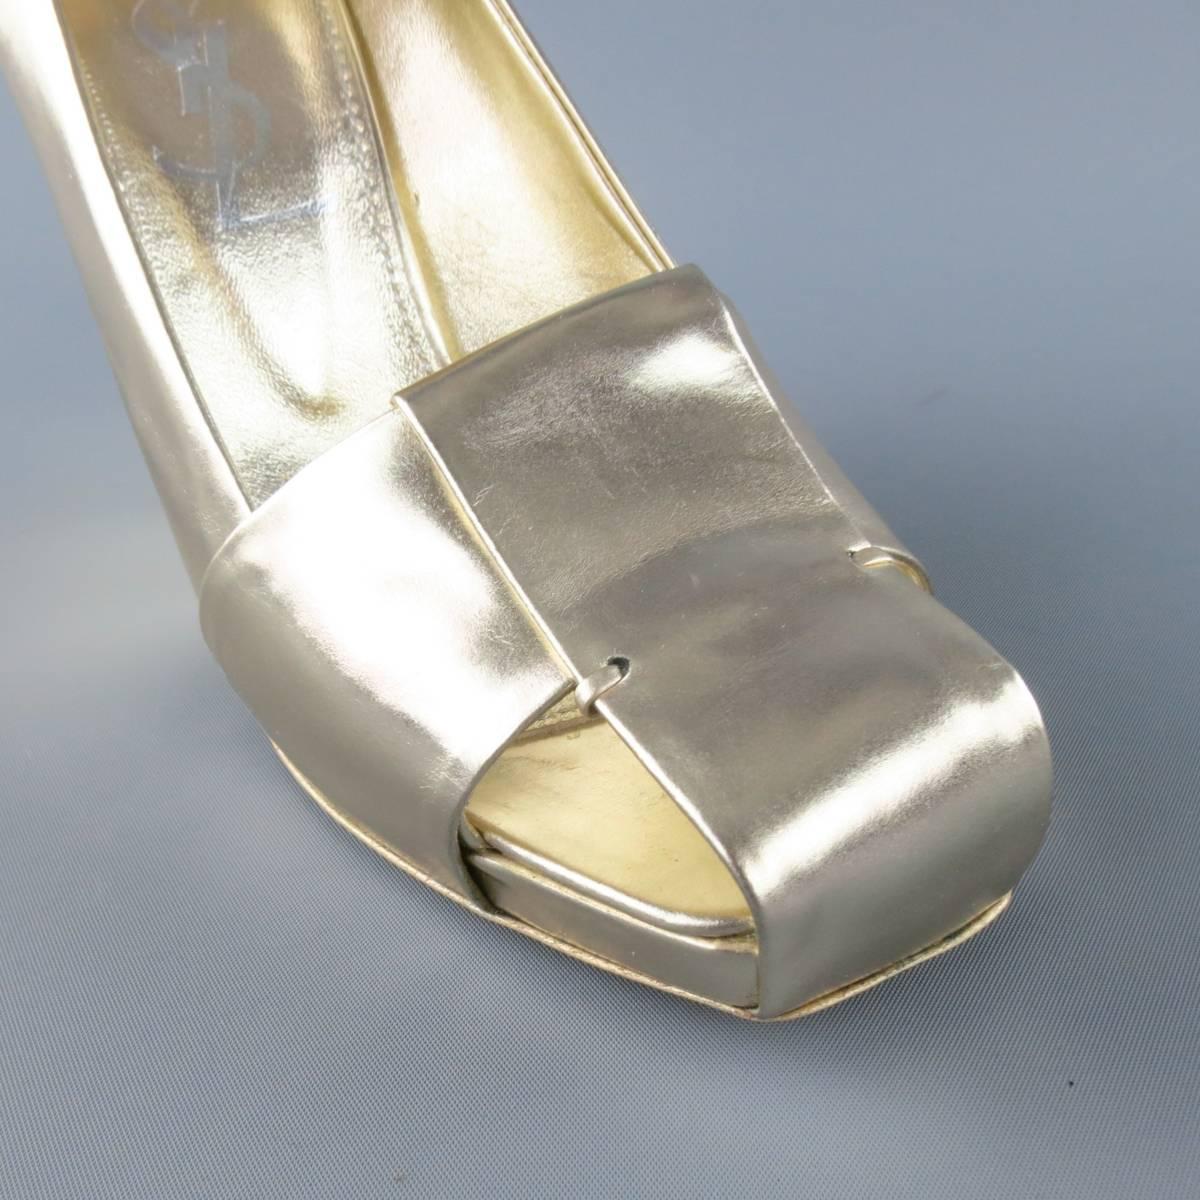 YVES SAINT LAURENT pumps come in a light metallic gold leather and feature a squared toe with cutouts, concealed platform, and thick, angular covered heel. Made in Italy.
 
Excellent Pre-Owned Condition.
Marked: 37.5
 
Heel: 4.5 in.
Platform:  0.5